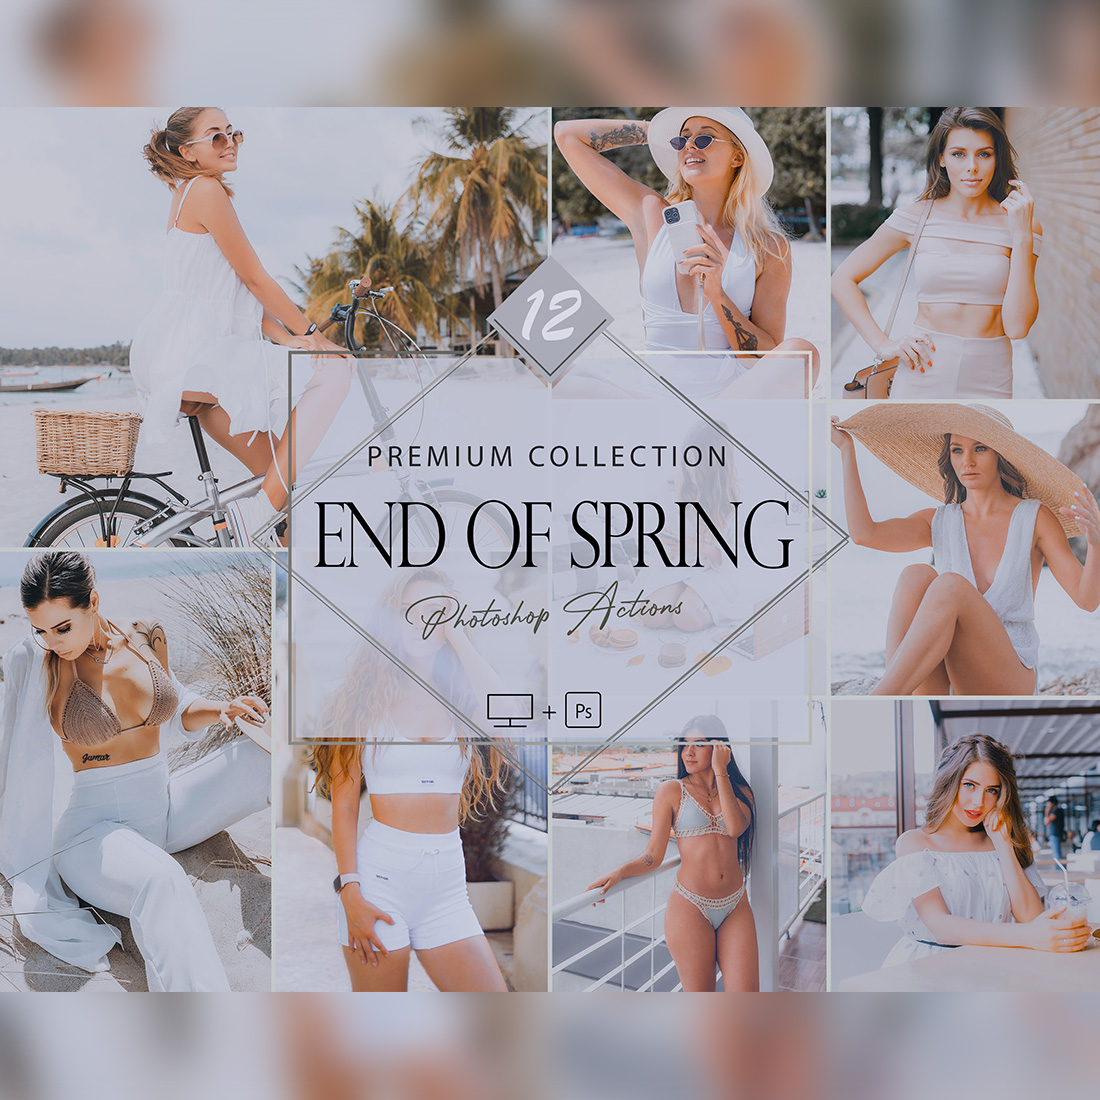 12 Photoshop Actions, End Of Spring Ps Action, Green Summer ACR Preset, Bright Filter, Warm And Cold Lifestyle Theme For Instagram, Blogger, cozy Outdoor cover image.